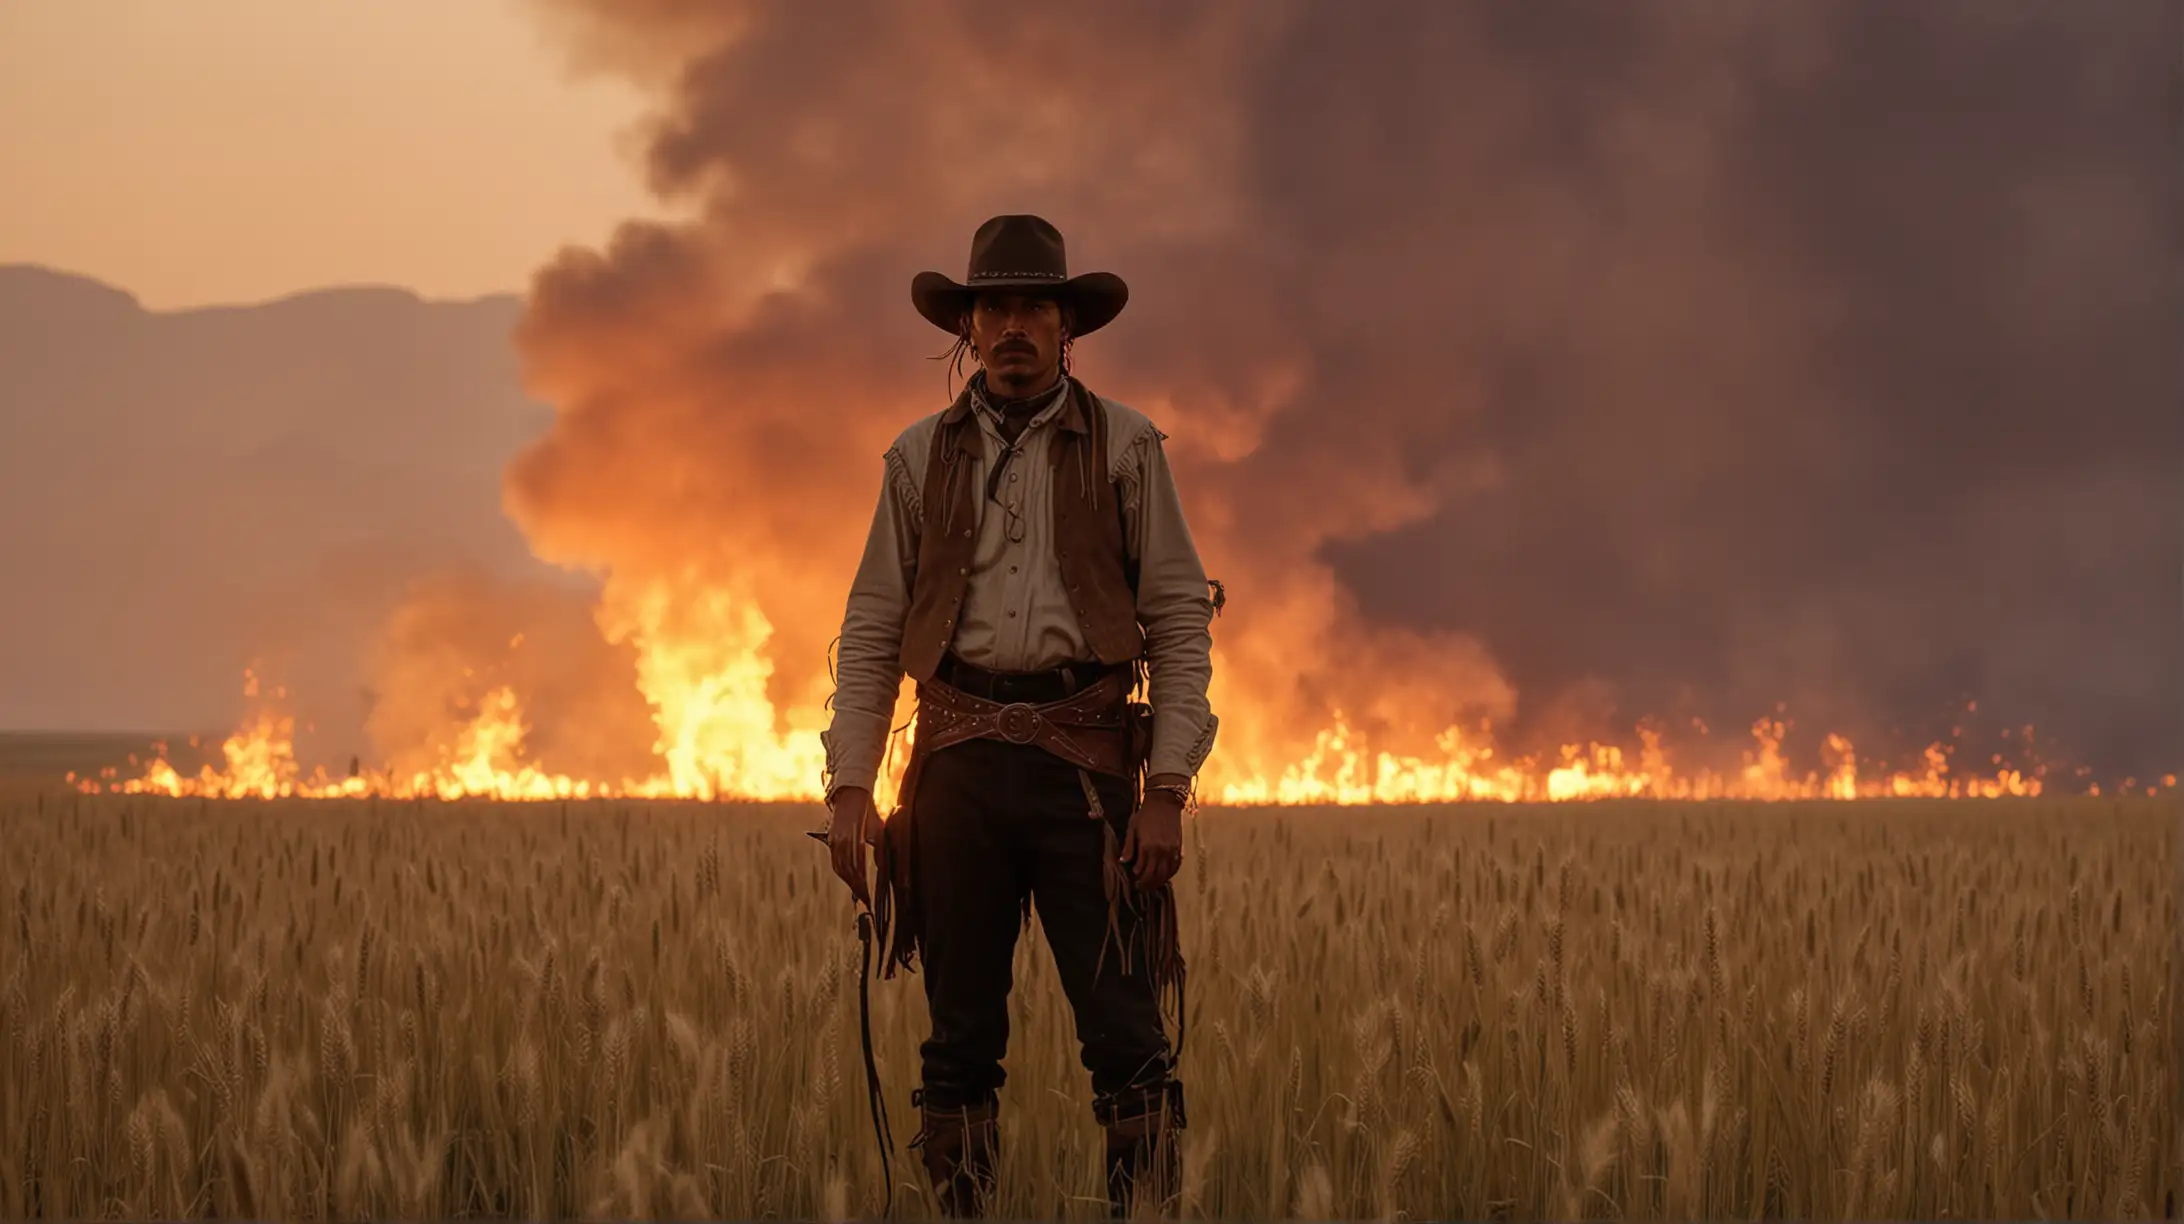 Native Cowboy in Burning Wheat Field at Dusk